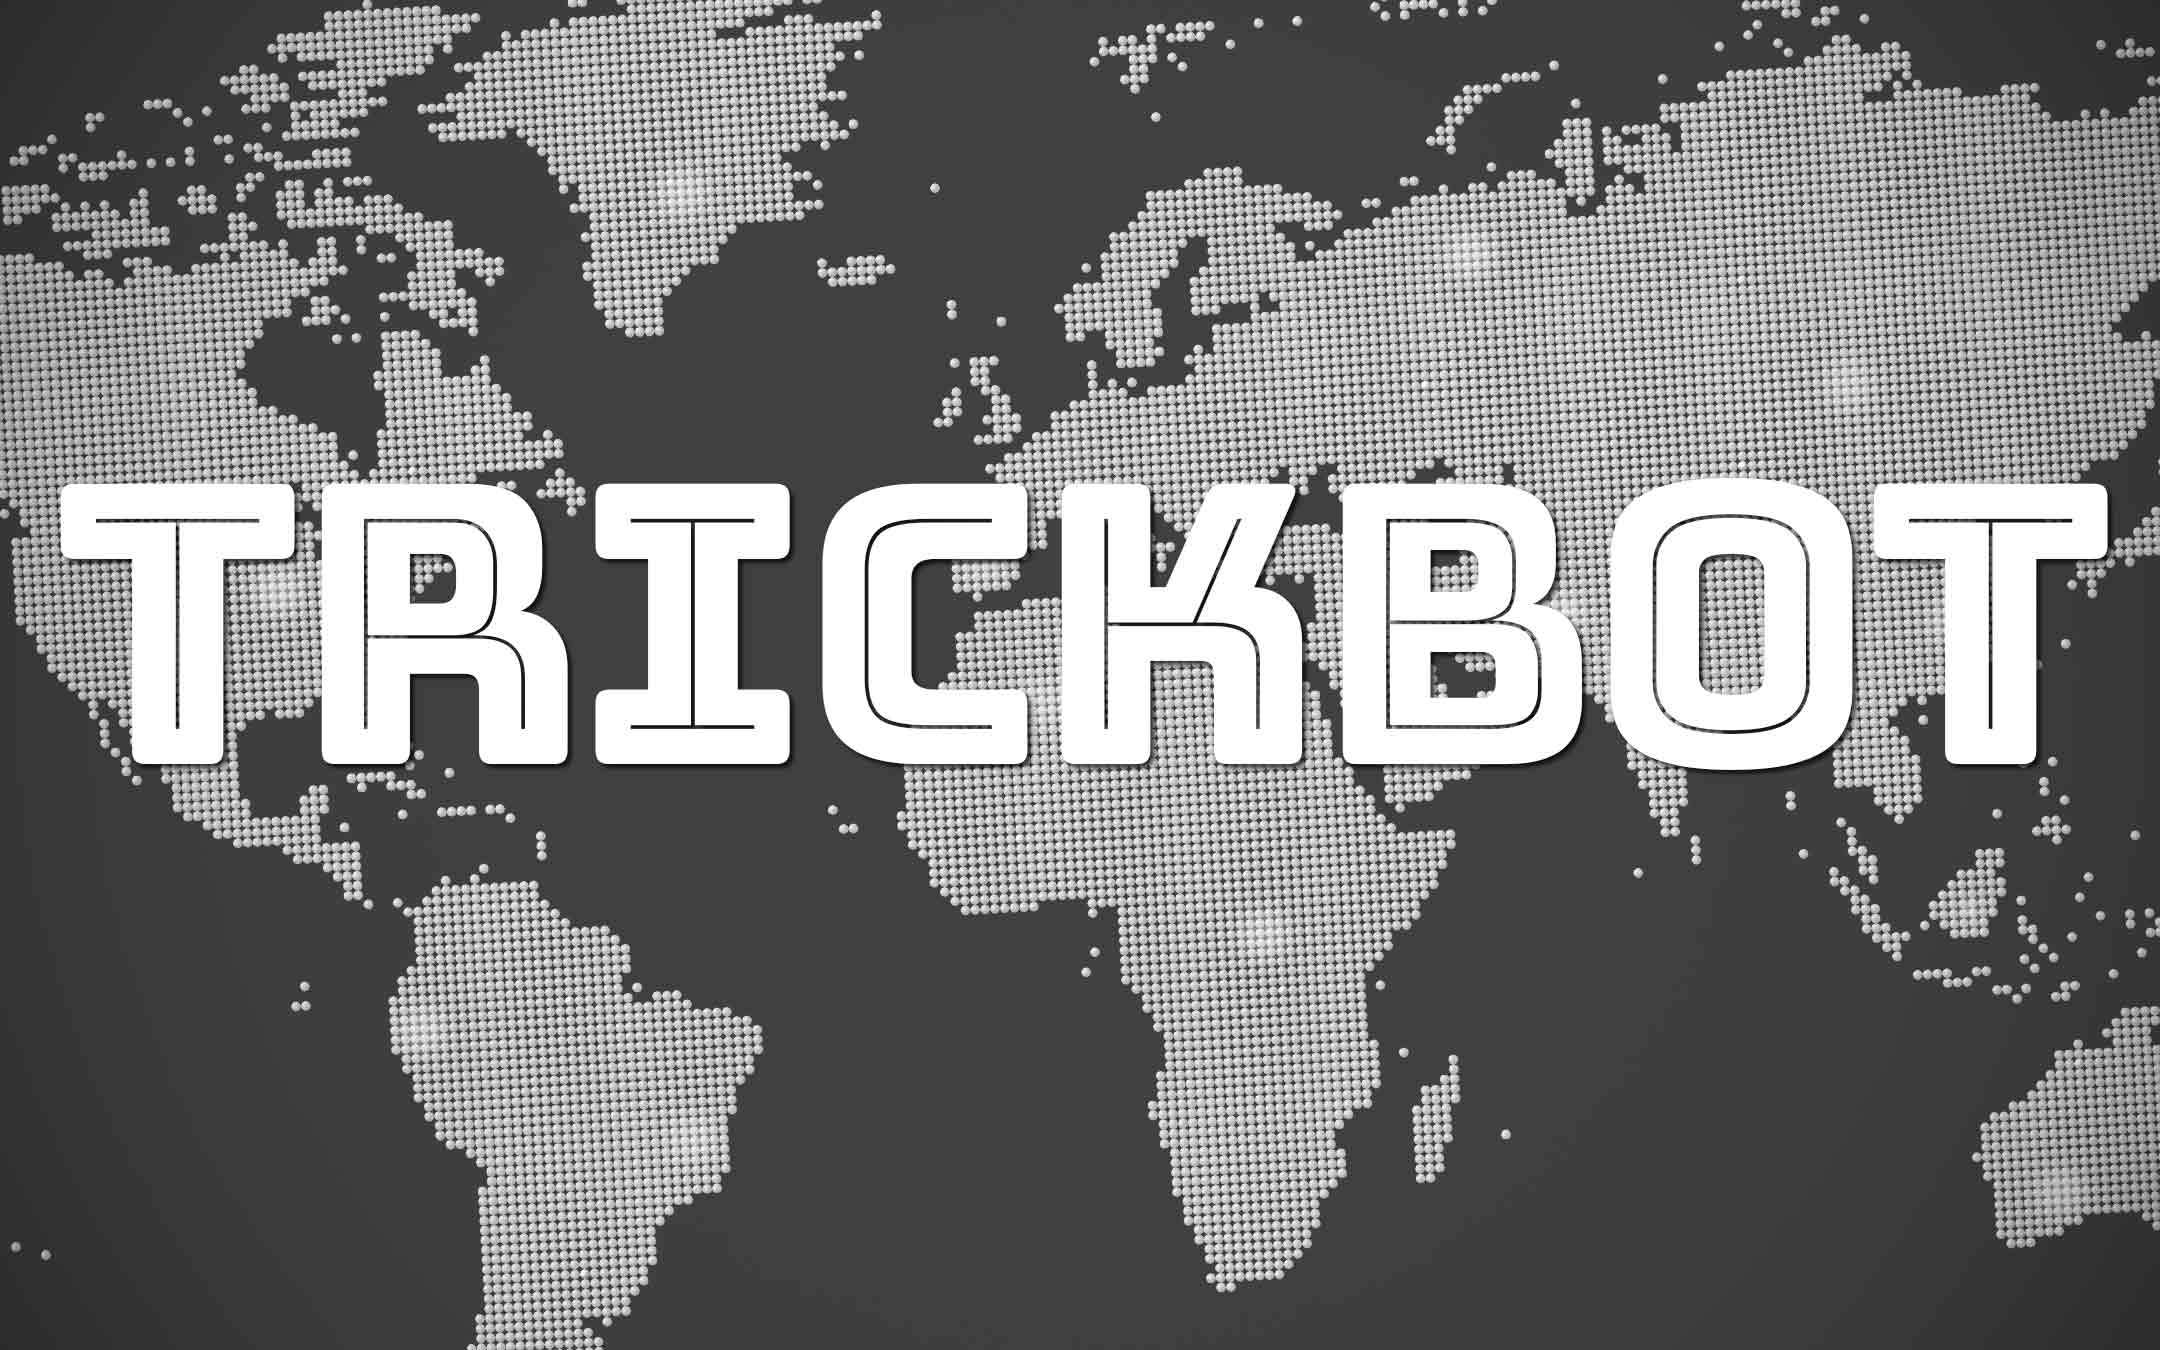 Microsoft leads the attack on the TrickBot botnet